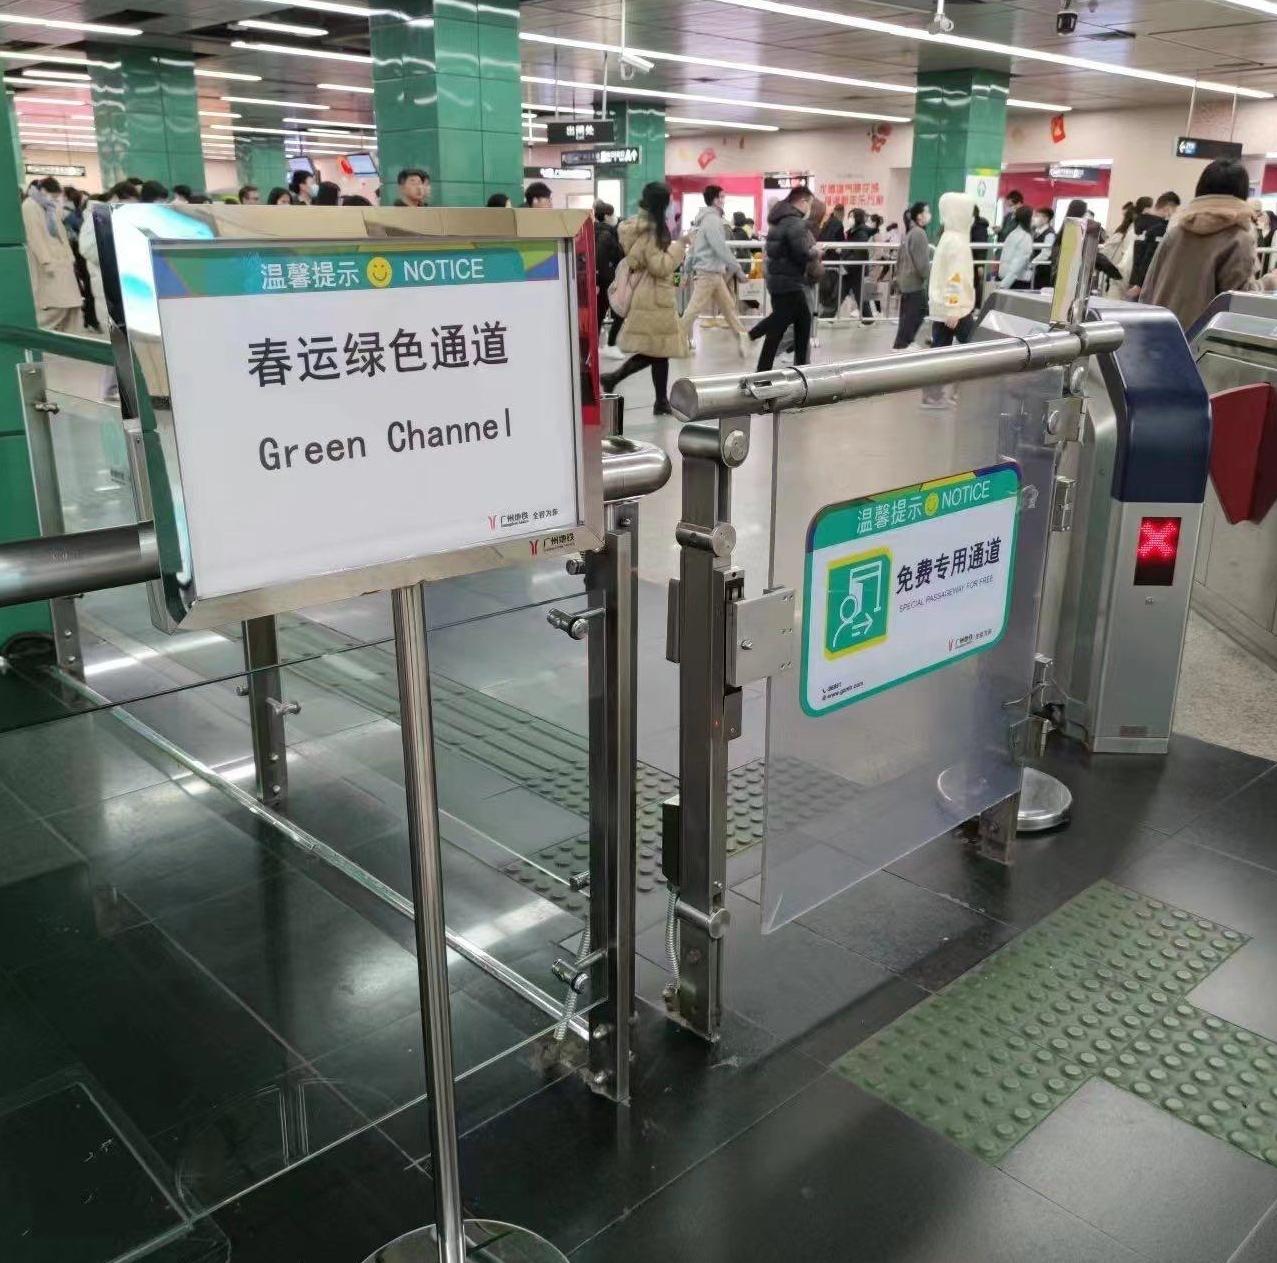 Guangzhou Metro's latest schedule for Spring Festival travel rush revealed